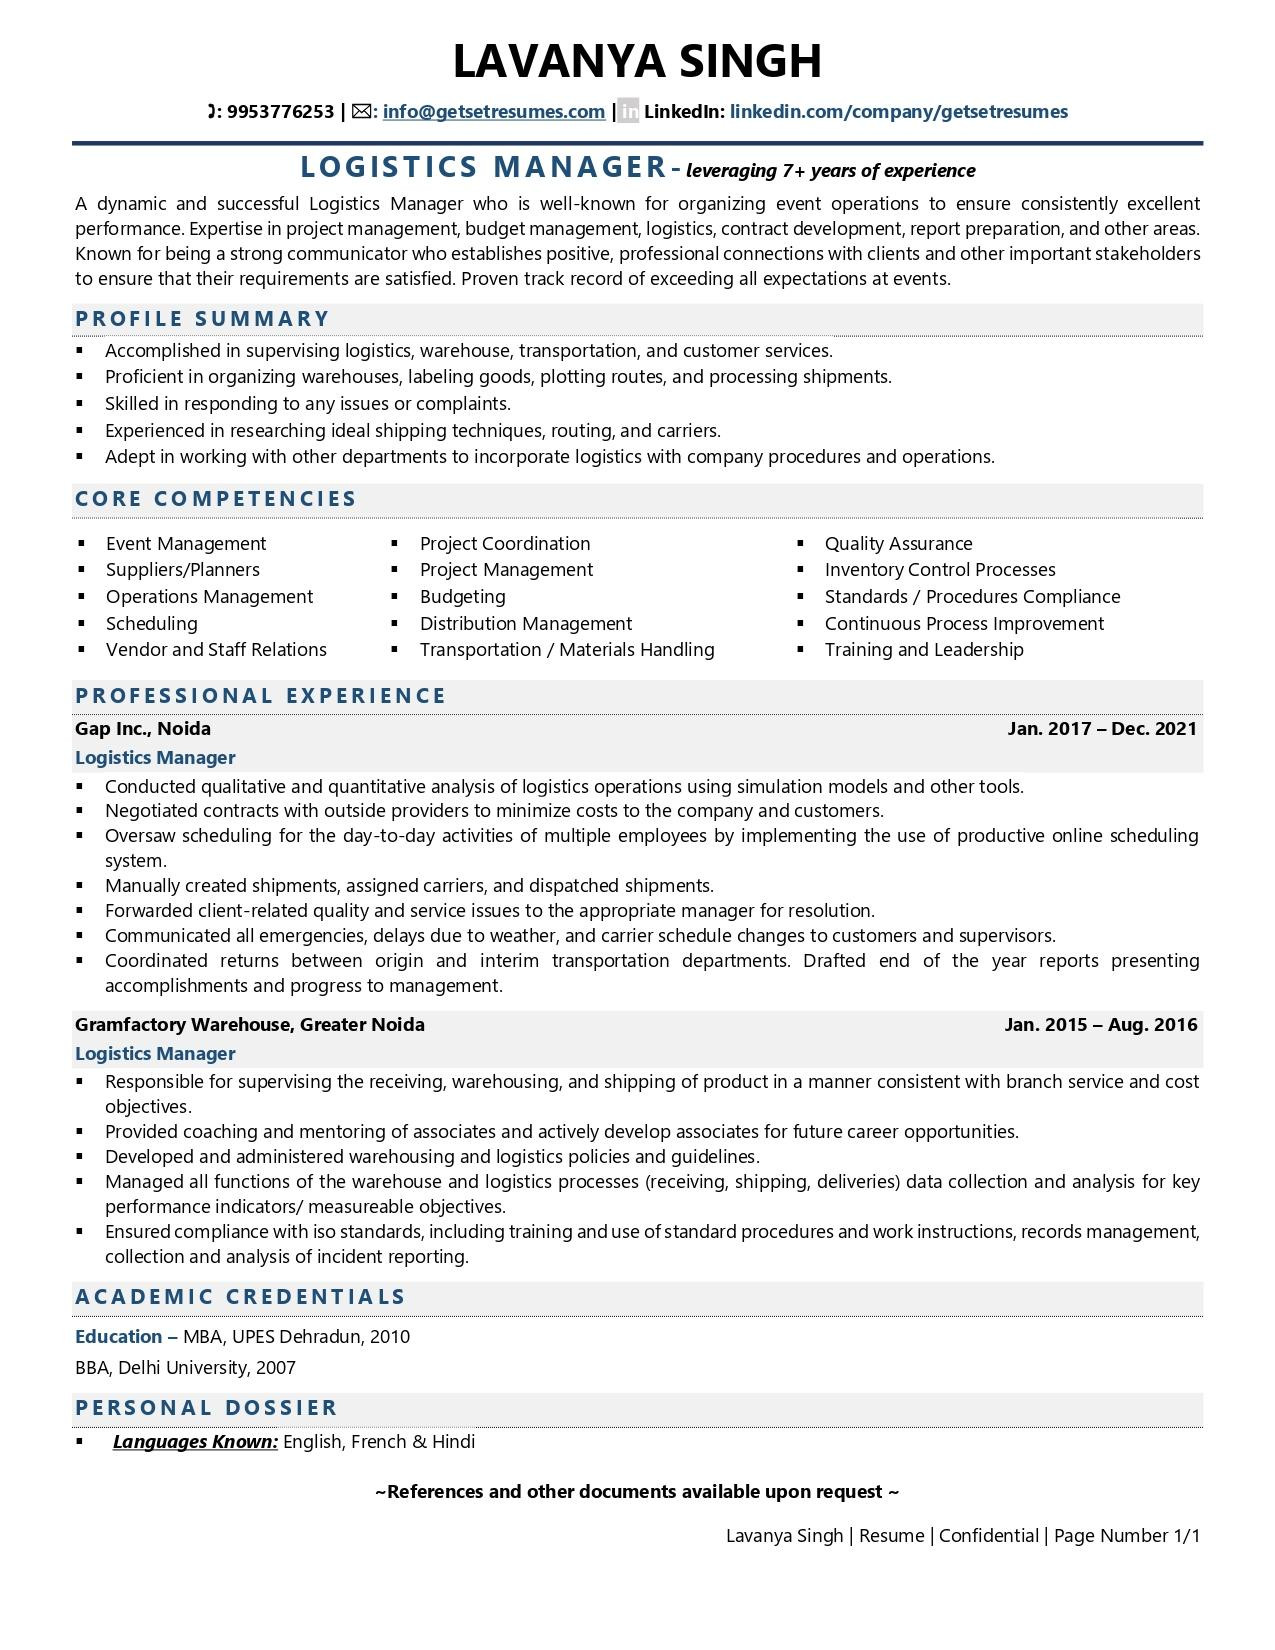 Sample Resume for Shipping and Receiving Manager Logistics Manager Resume Examples & Template (with Job Winning Tips)